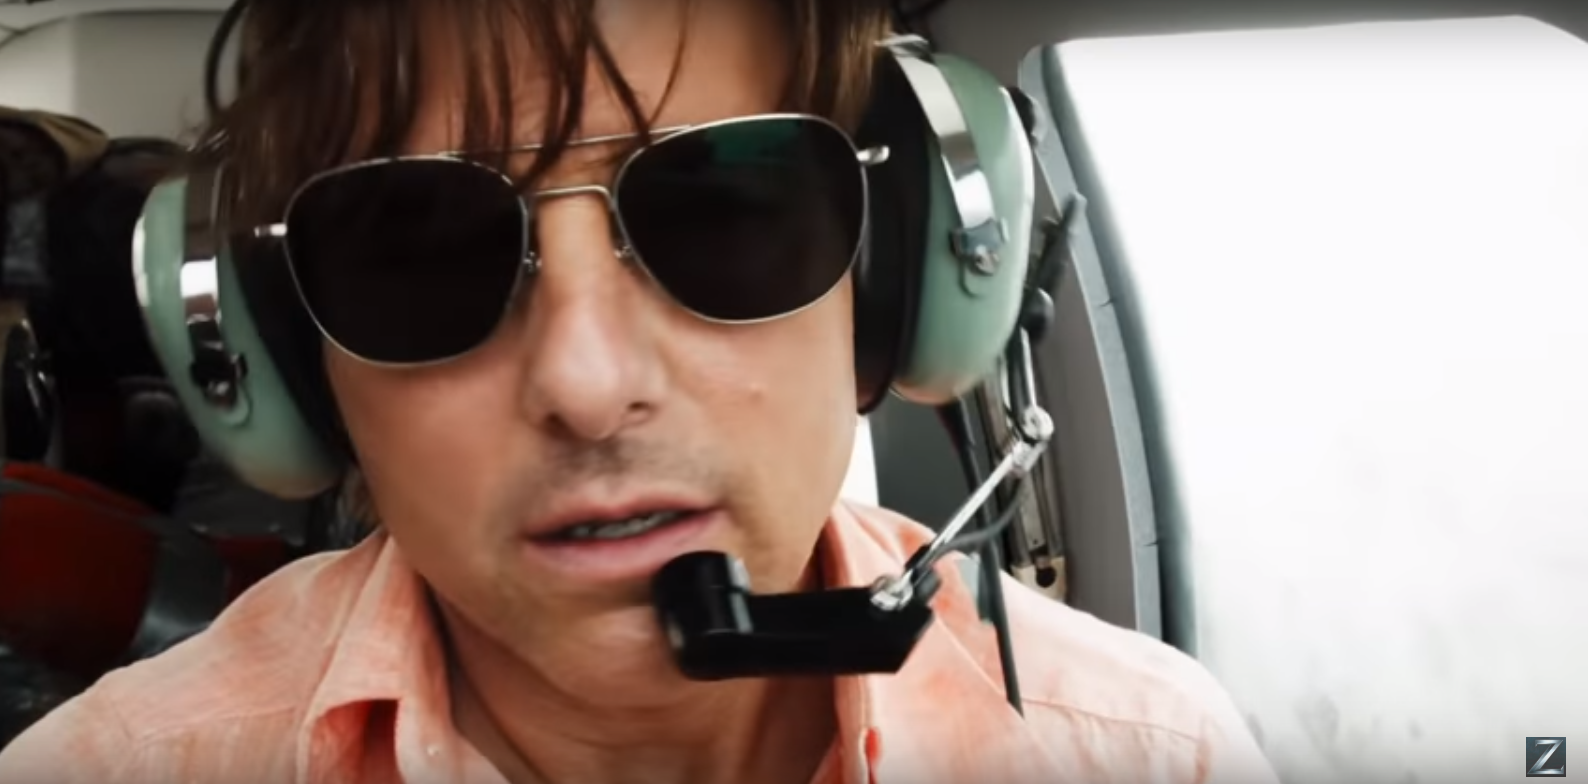 Tom Cruise's Sunglasses from American Made – Randolph USA